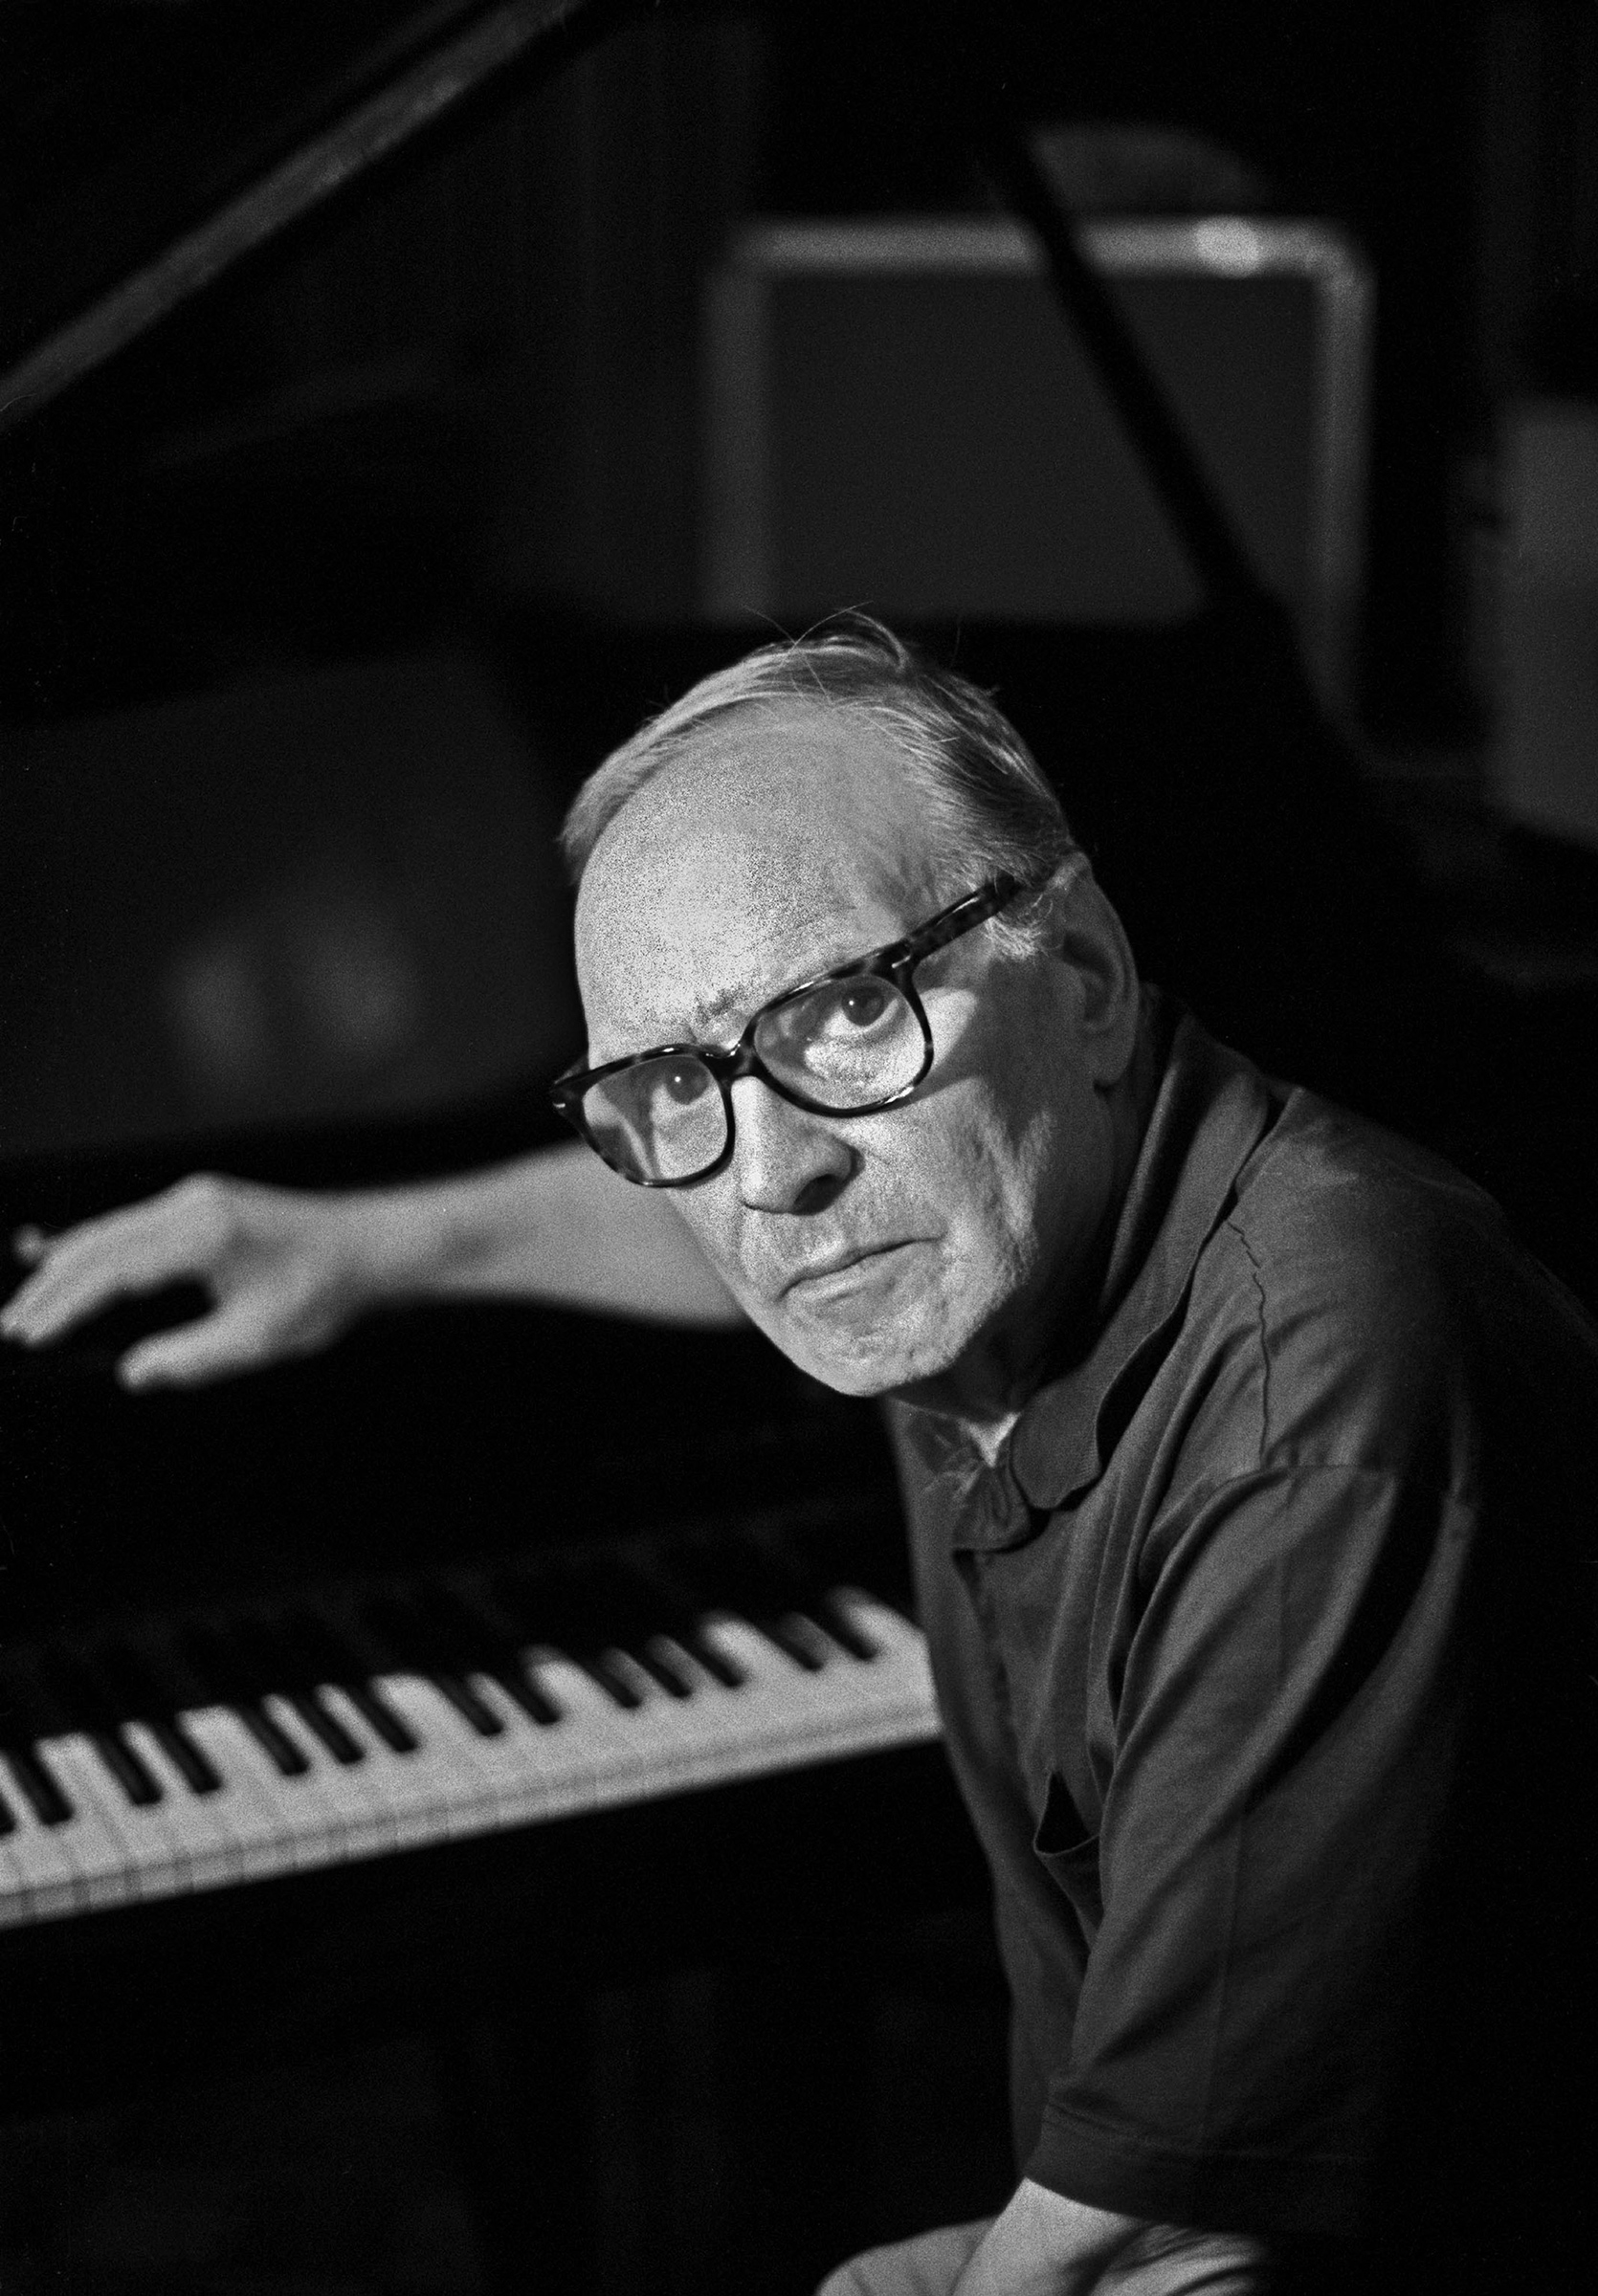 Morricone, pictured in 2003, four years before he received an Academy Award for lifetime achievement (Ferdinando Scianna—Magnum Photos)